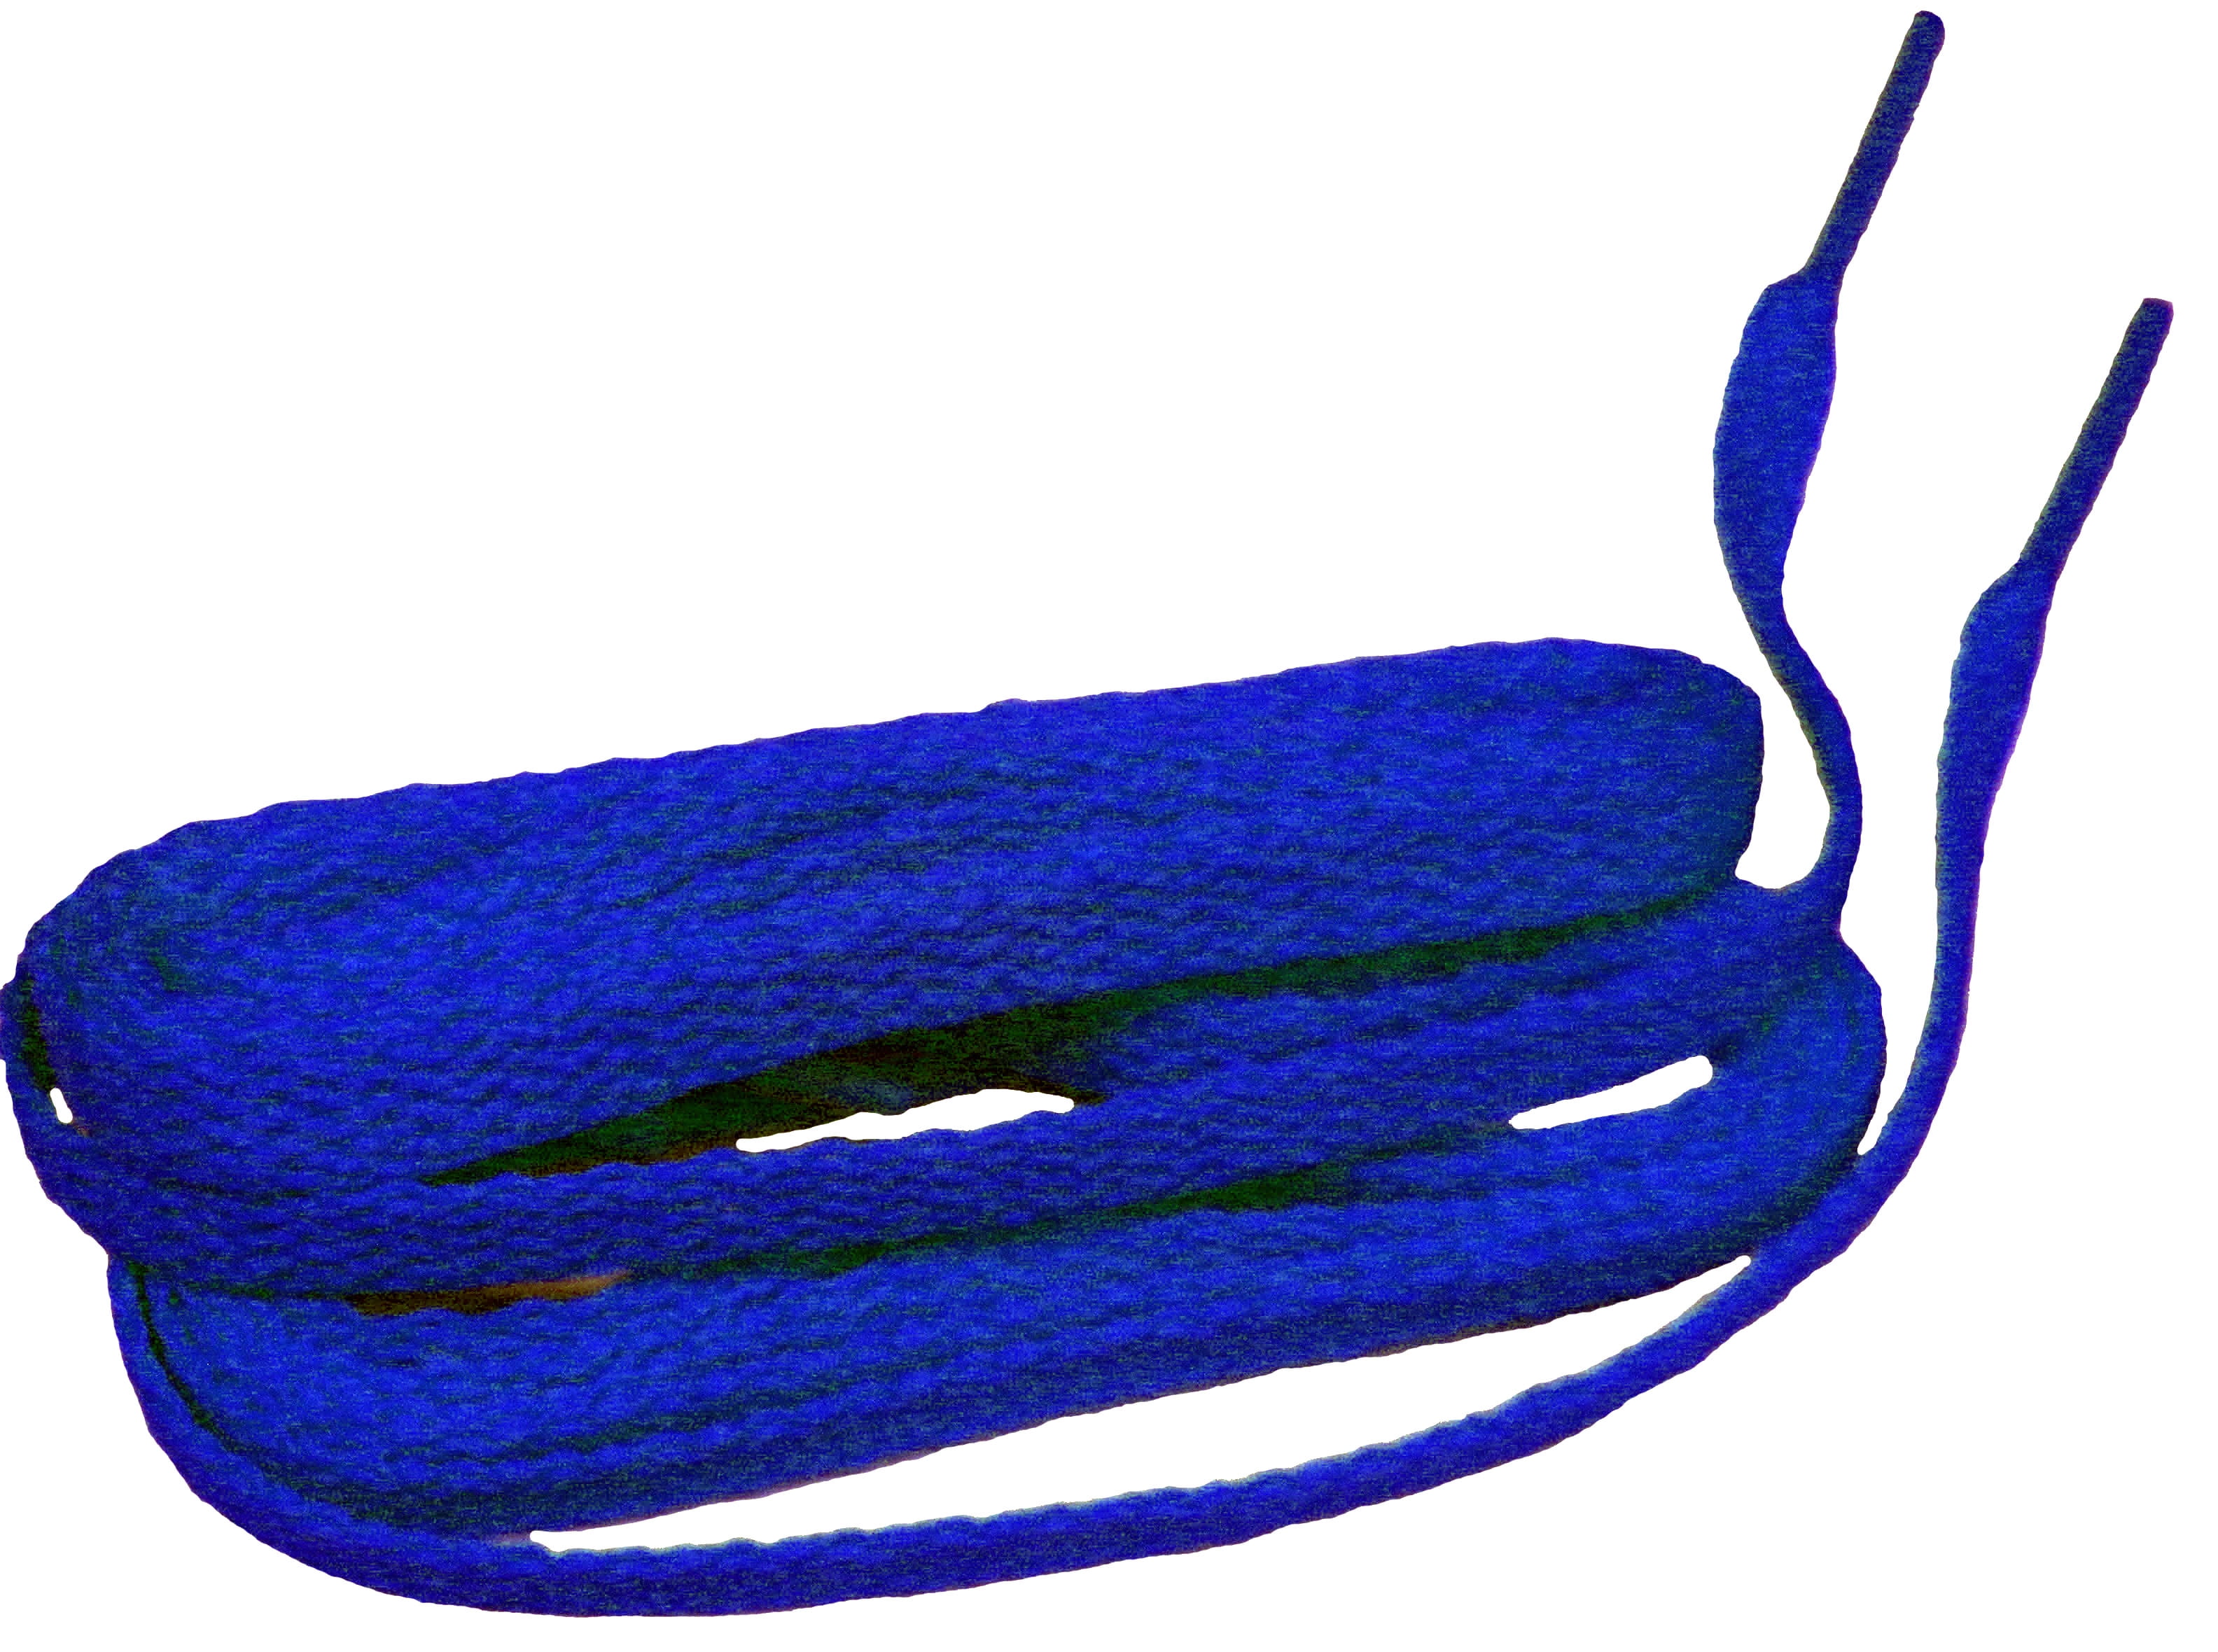 2 Pairs Oval 45" Athletic Sports Sneaker "Royal Blue" Shoelace Strings